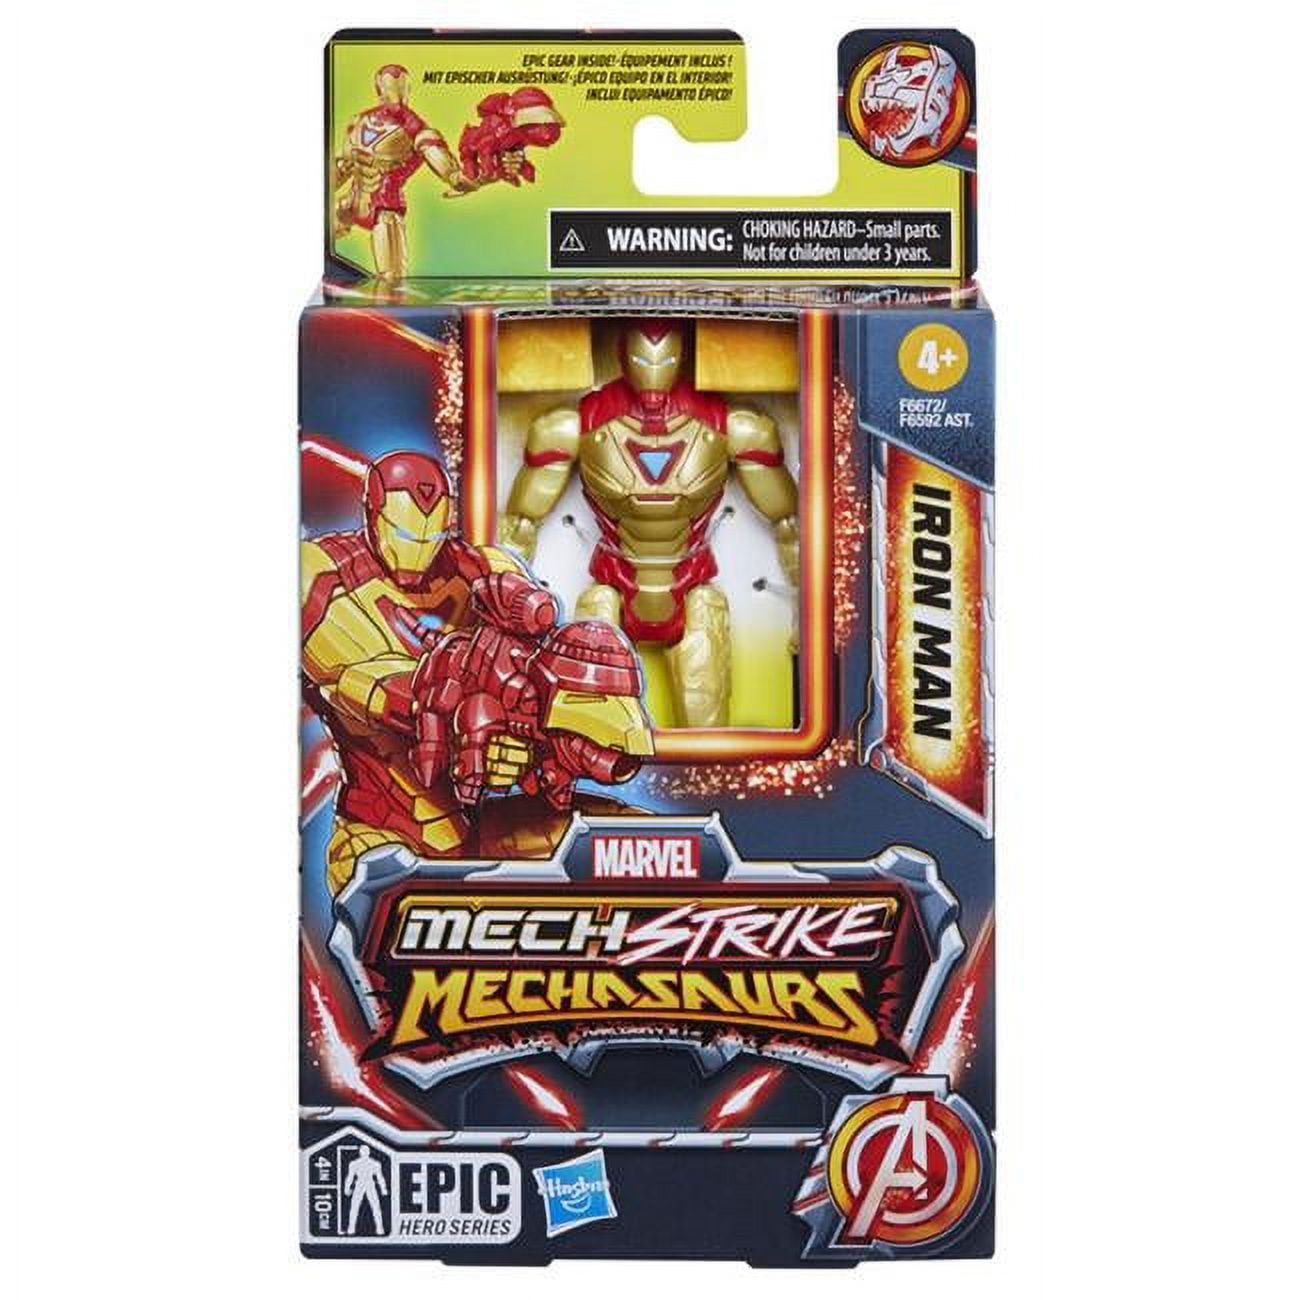 HSBF6592 4 in. Marvel Mech Strike Mechasaurs Iron Man Action Figure with Weapon Accessory -  HASBRO